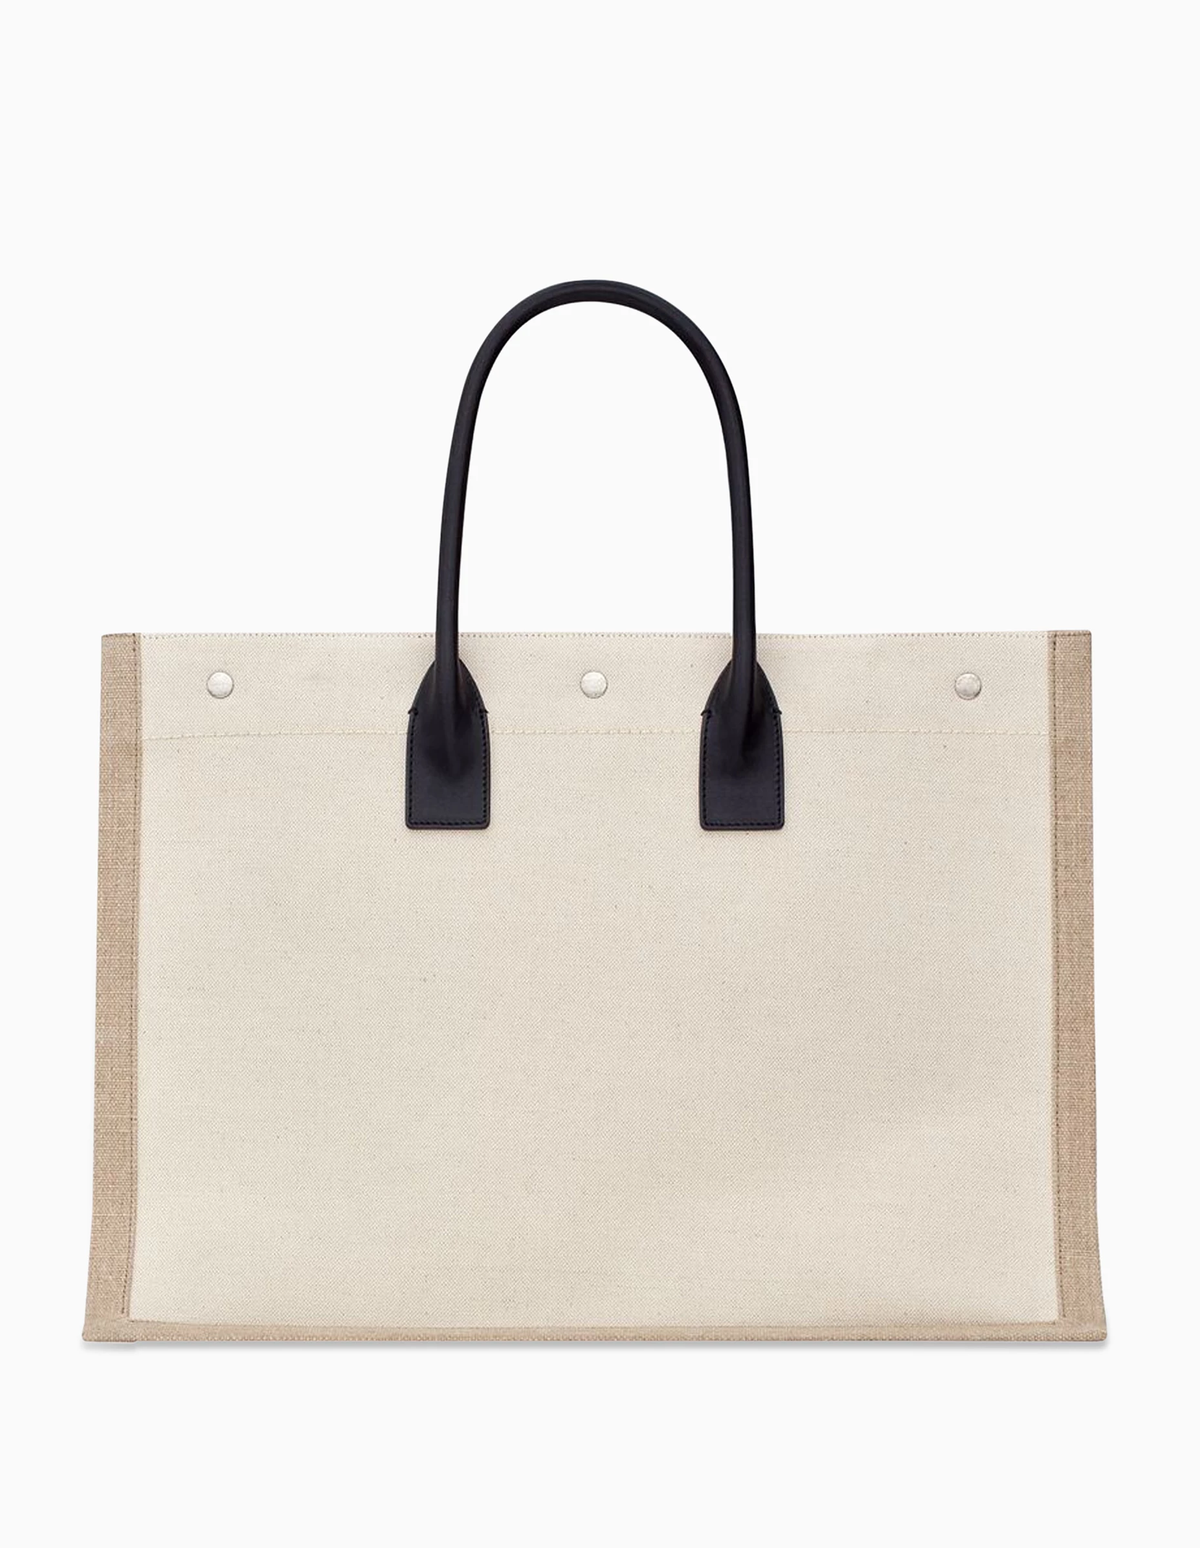 Saint Laurent Rive Gauche recycled canvas with logo bag